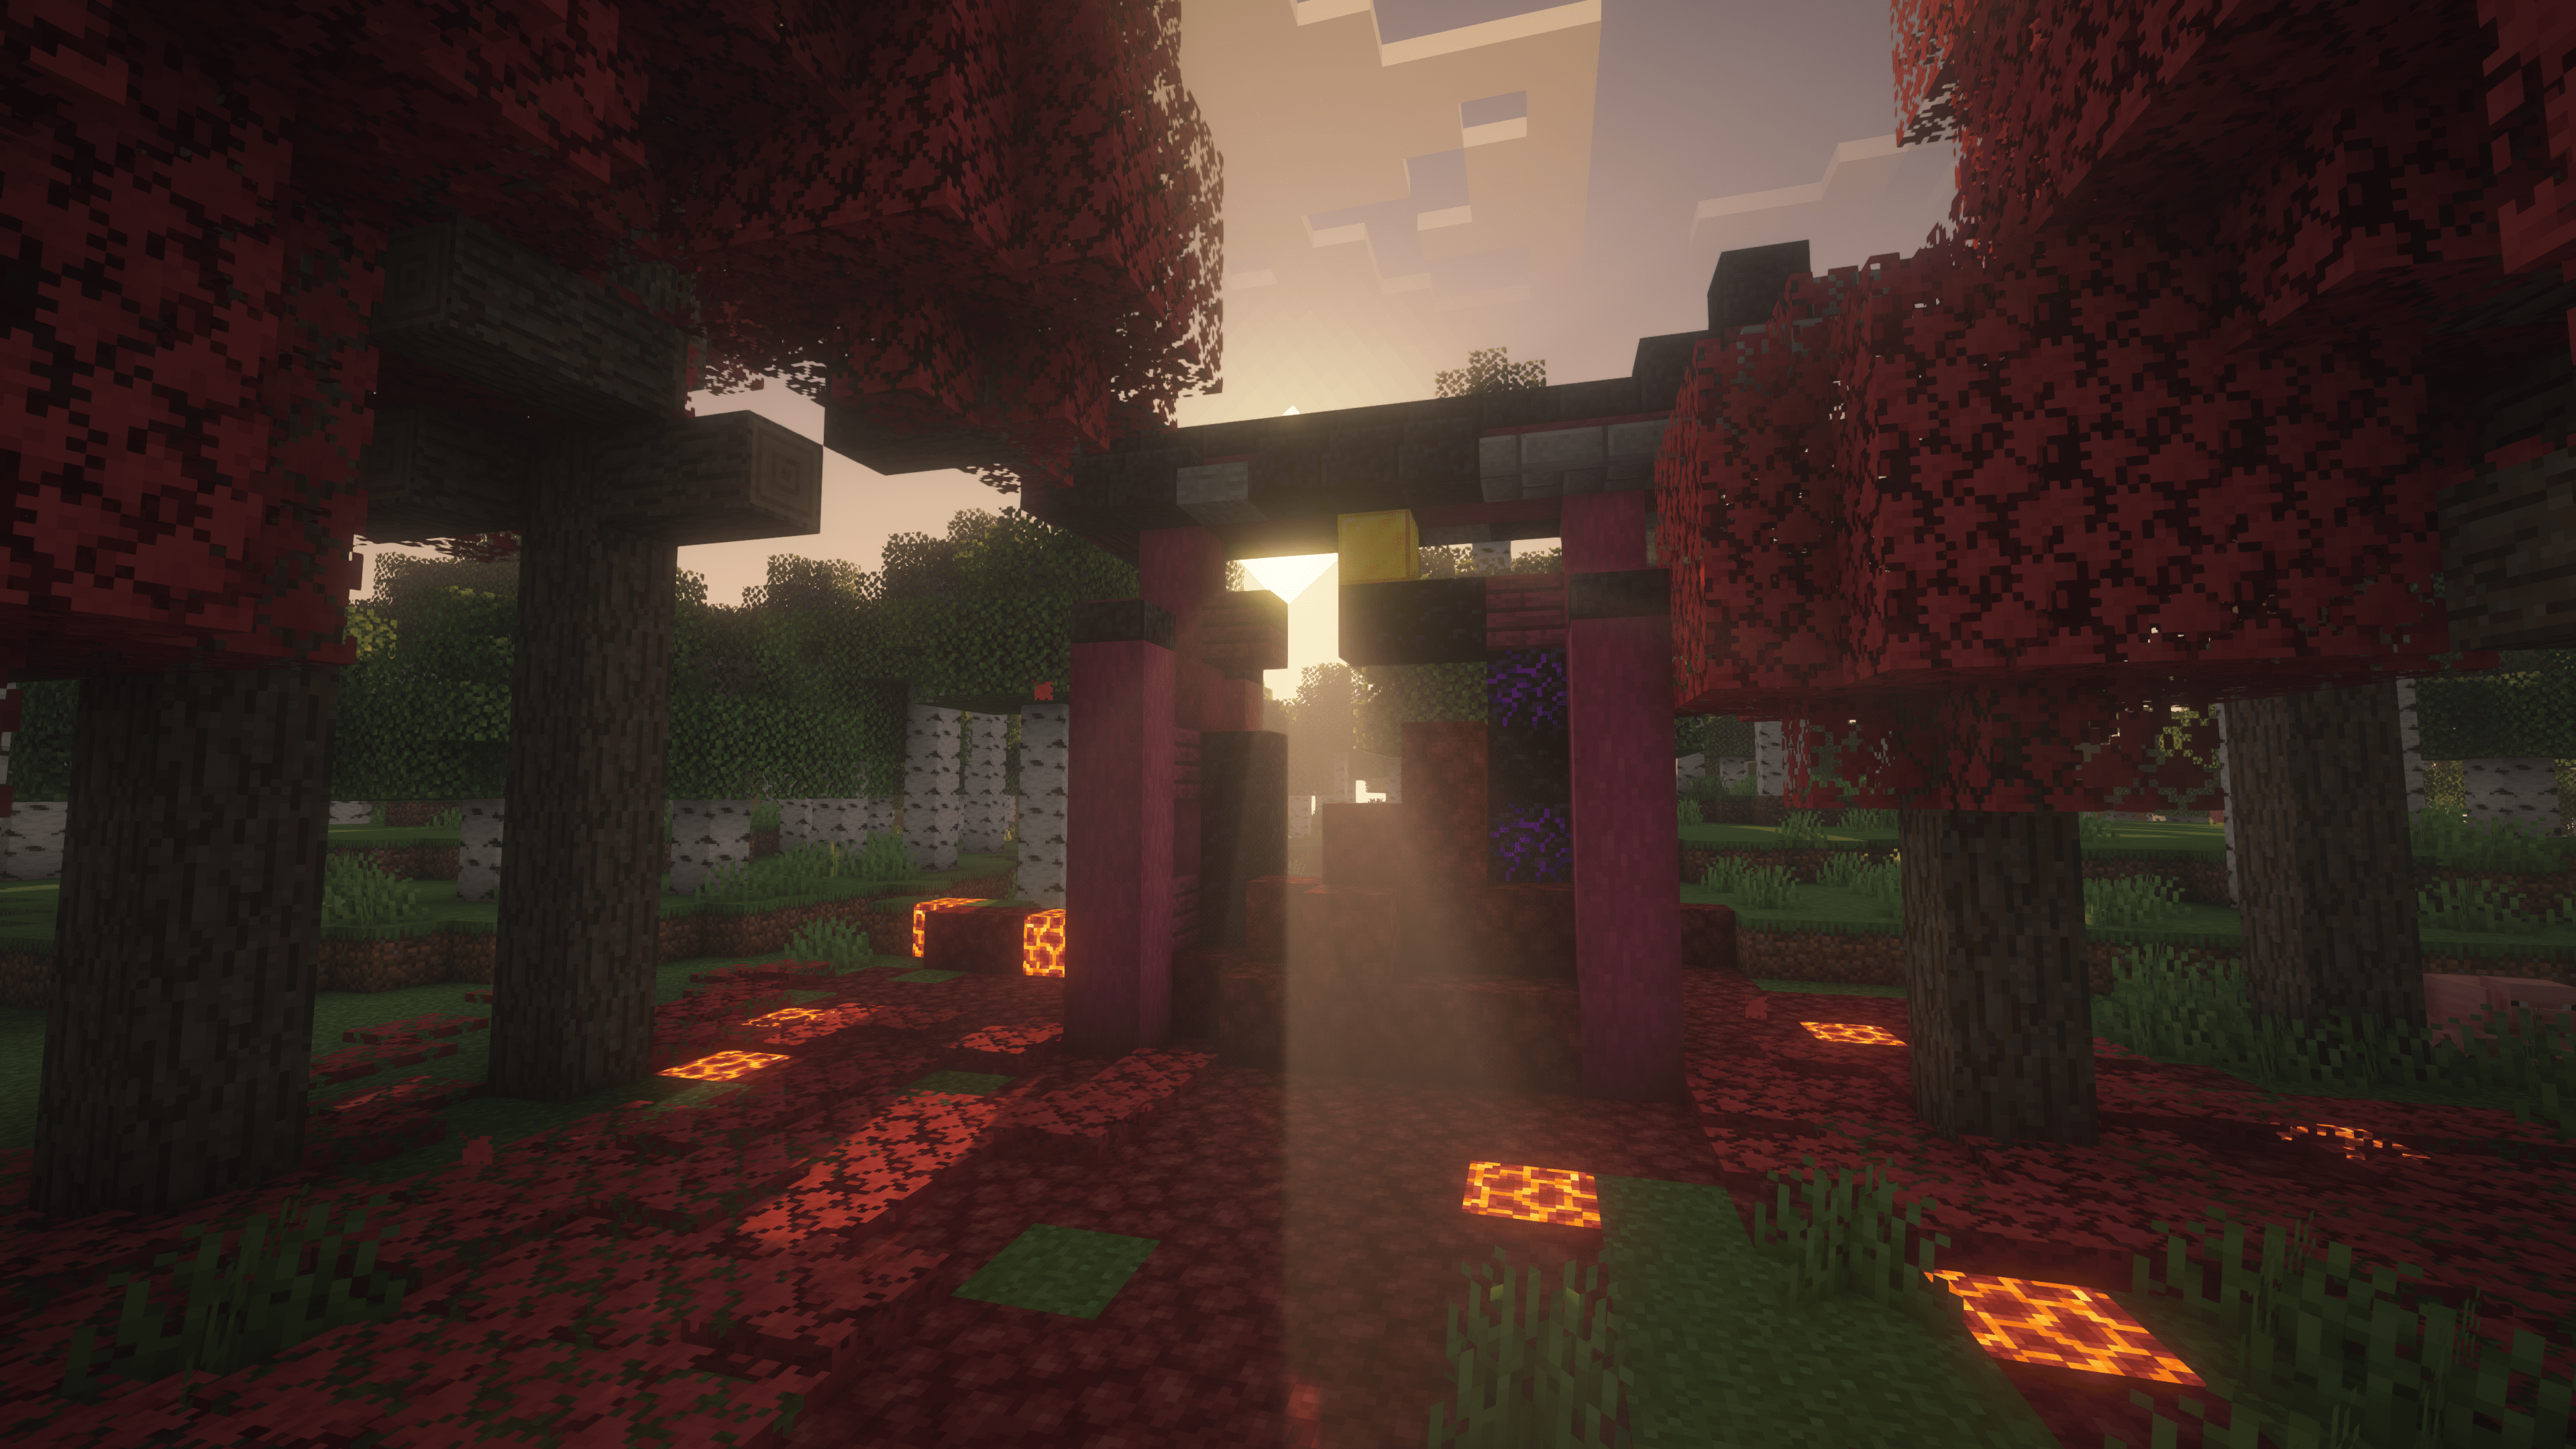 A torii gate variant of a ruined nether portal left to ruin in a red maple woods